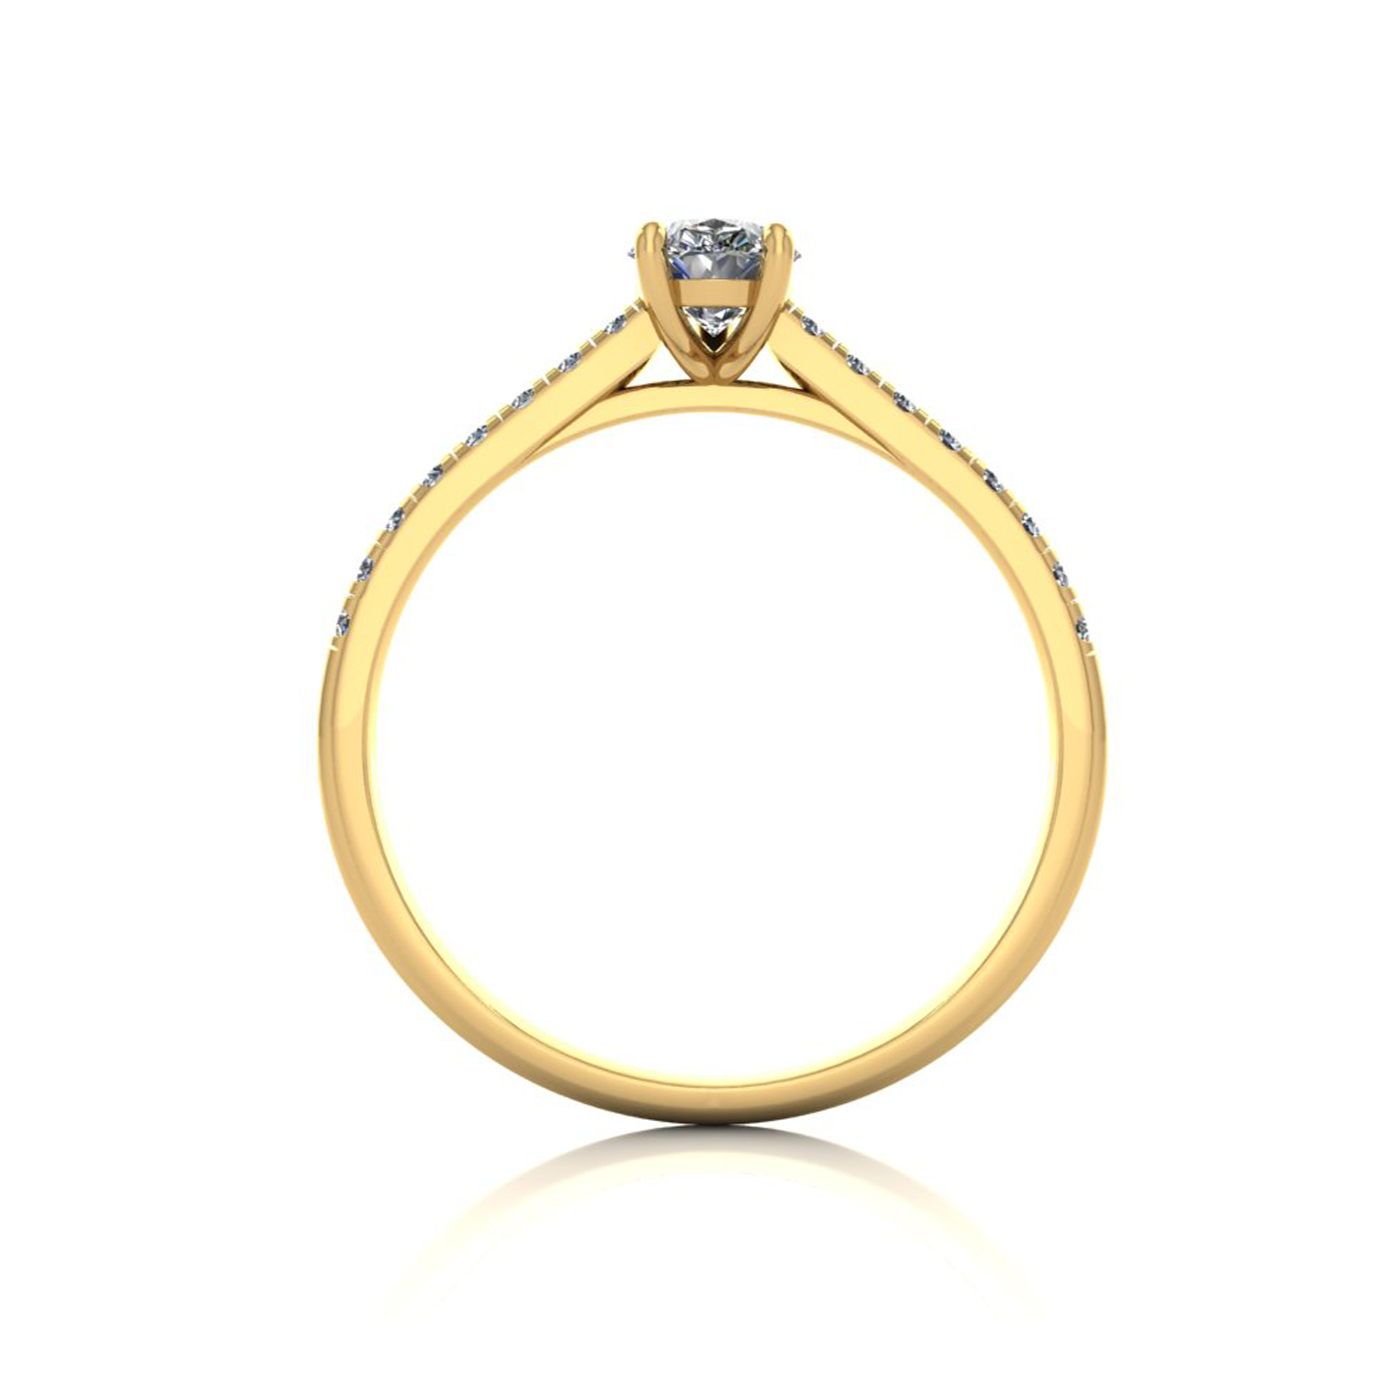 18k yellow gold  0.50ct 3 prongs pear diamond engagement ring with whisper thin pavÉ set band